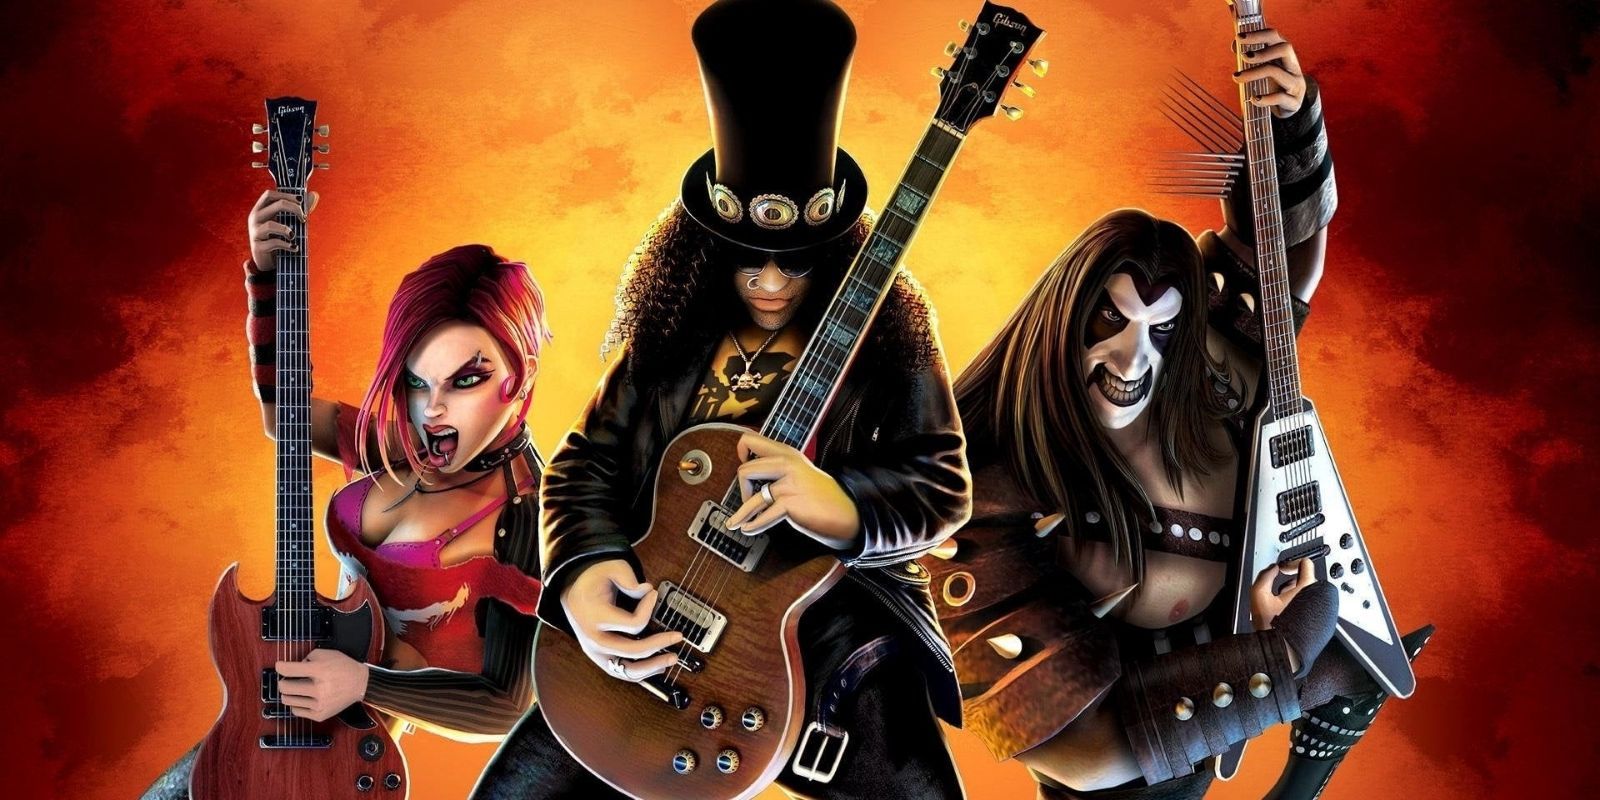 Some of the characters in Guitar Hero